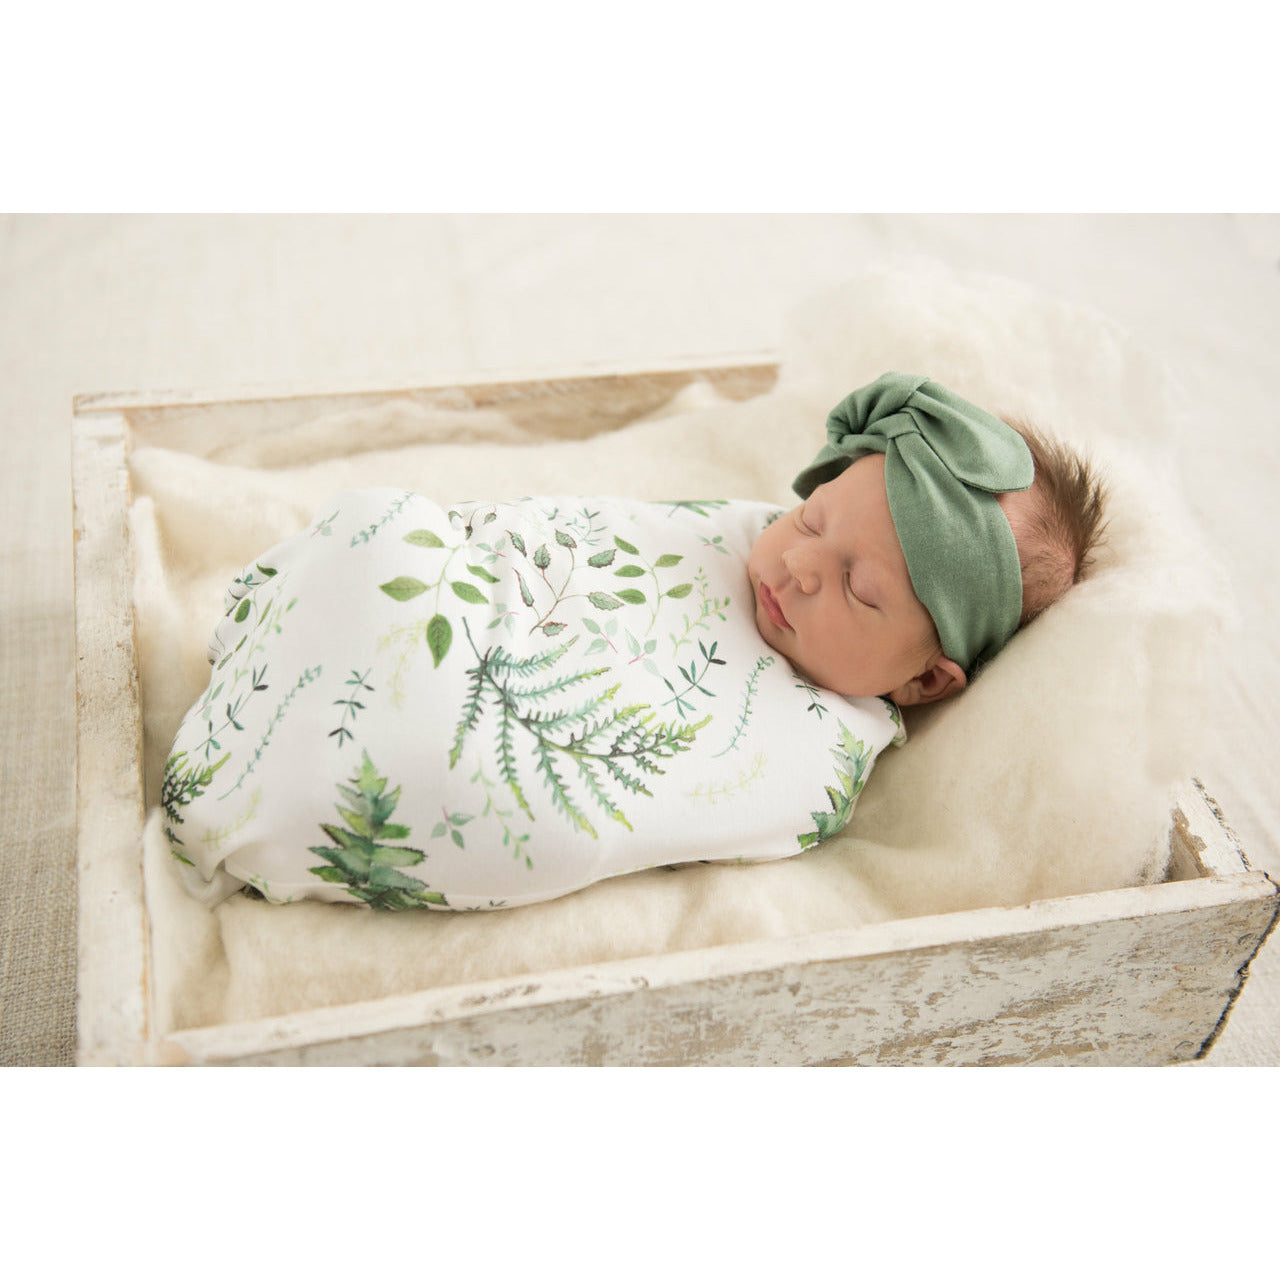 Enchanted Baby Jersey Wrap & Beanie Set